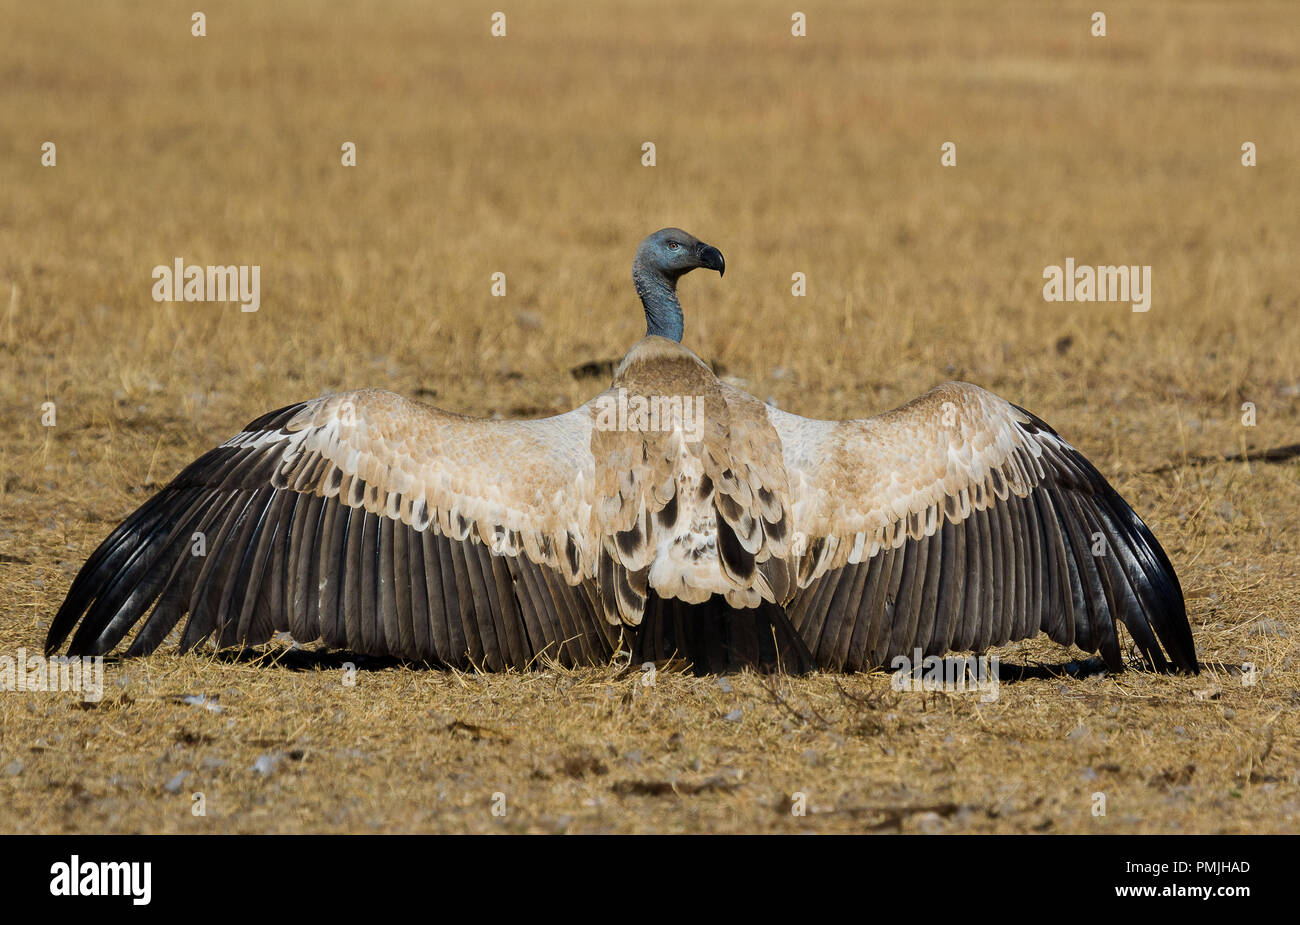 A cape vulture with spread wings photographed in South Africa Stock Photo